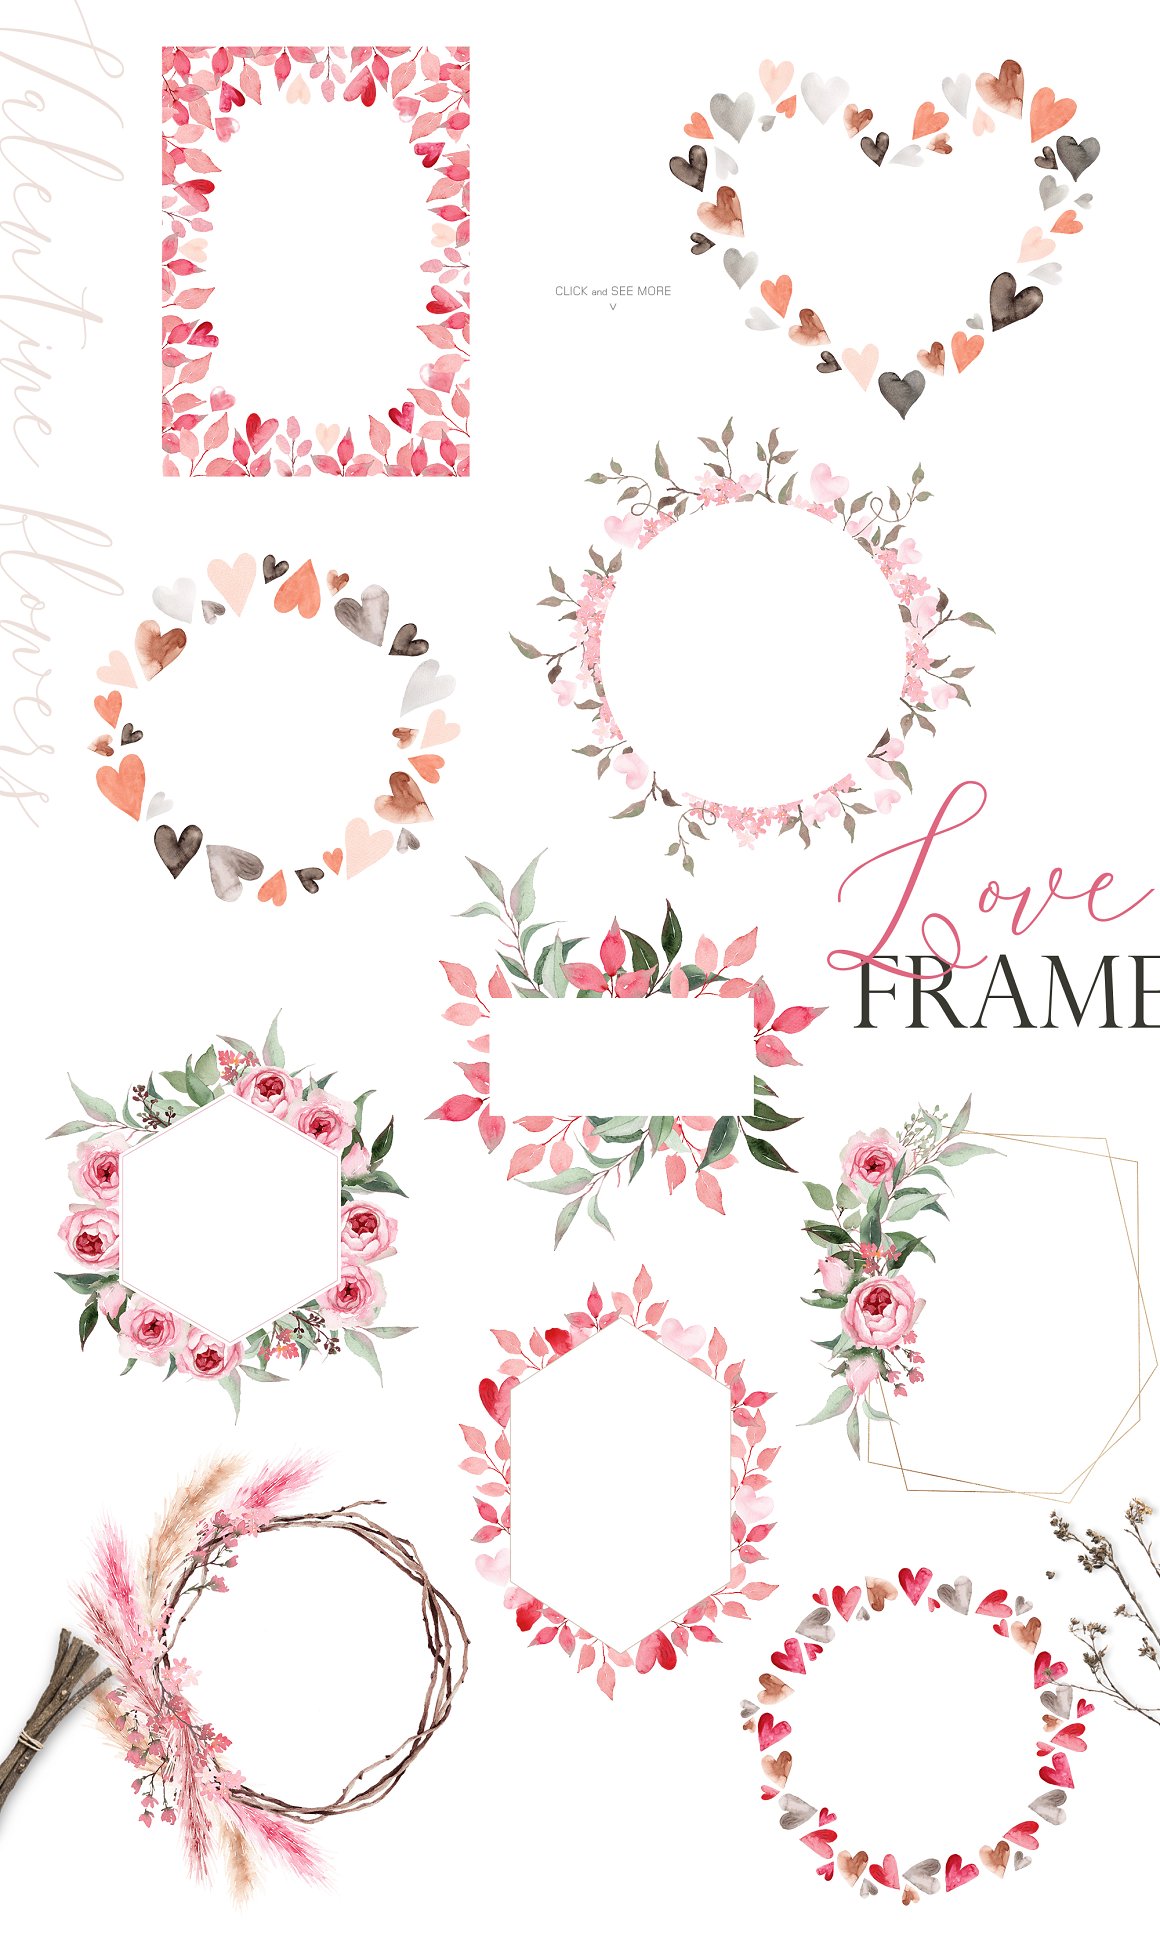 A set of 9 different watercolor flowers frames on a white background.